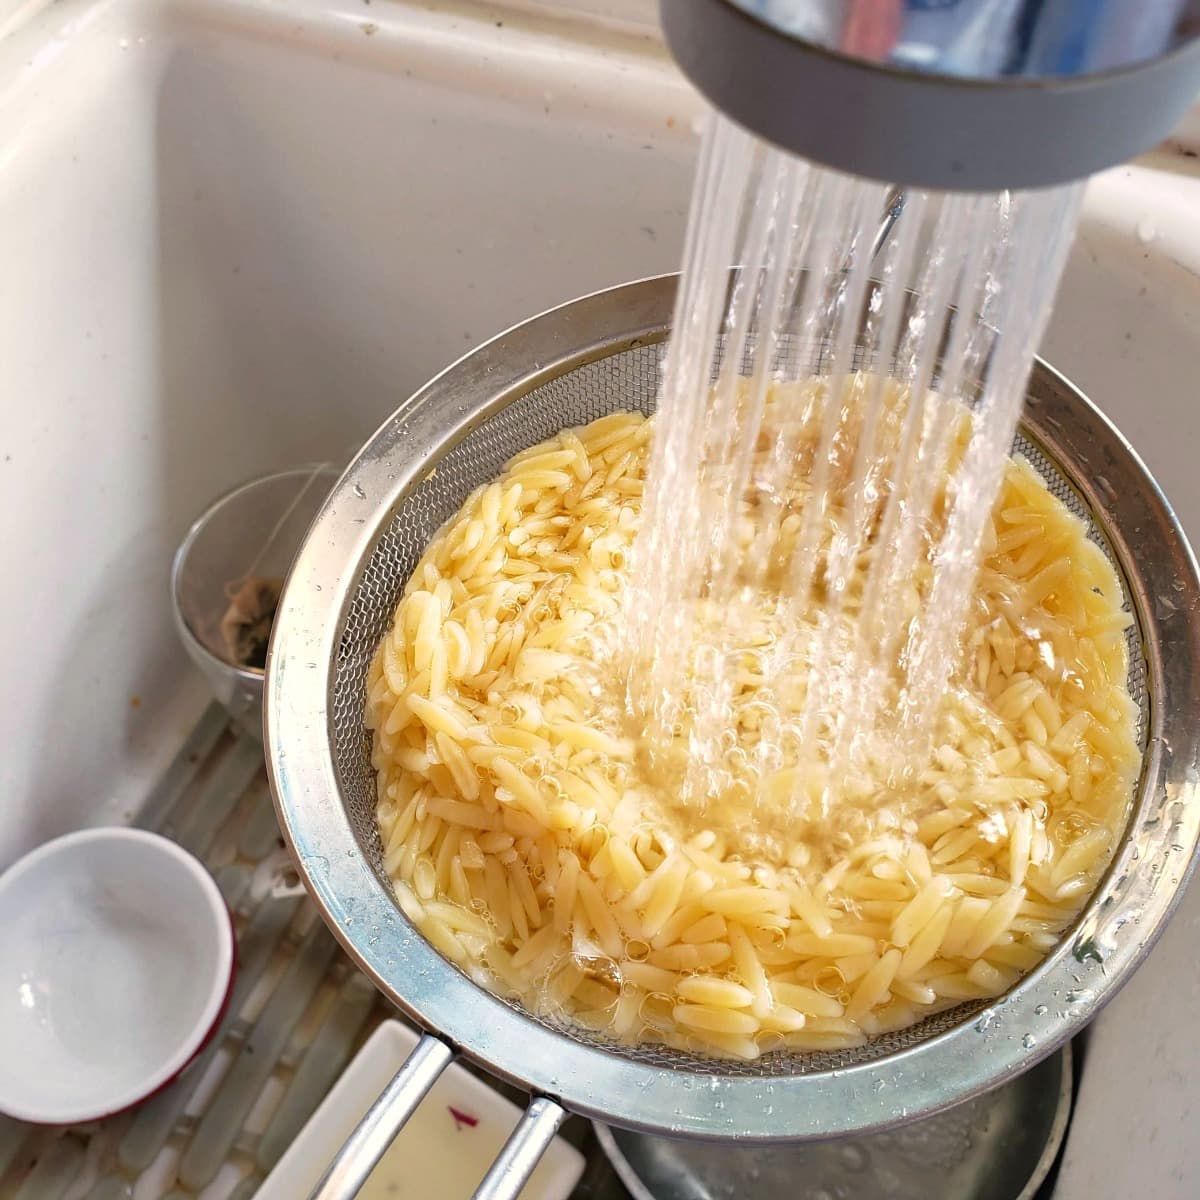 Cooked orzo being rinsed in a colander